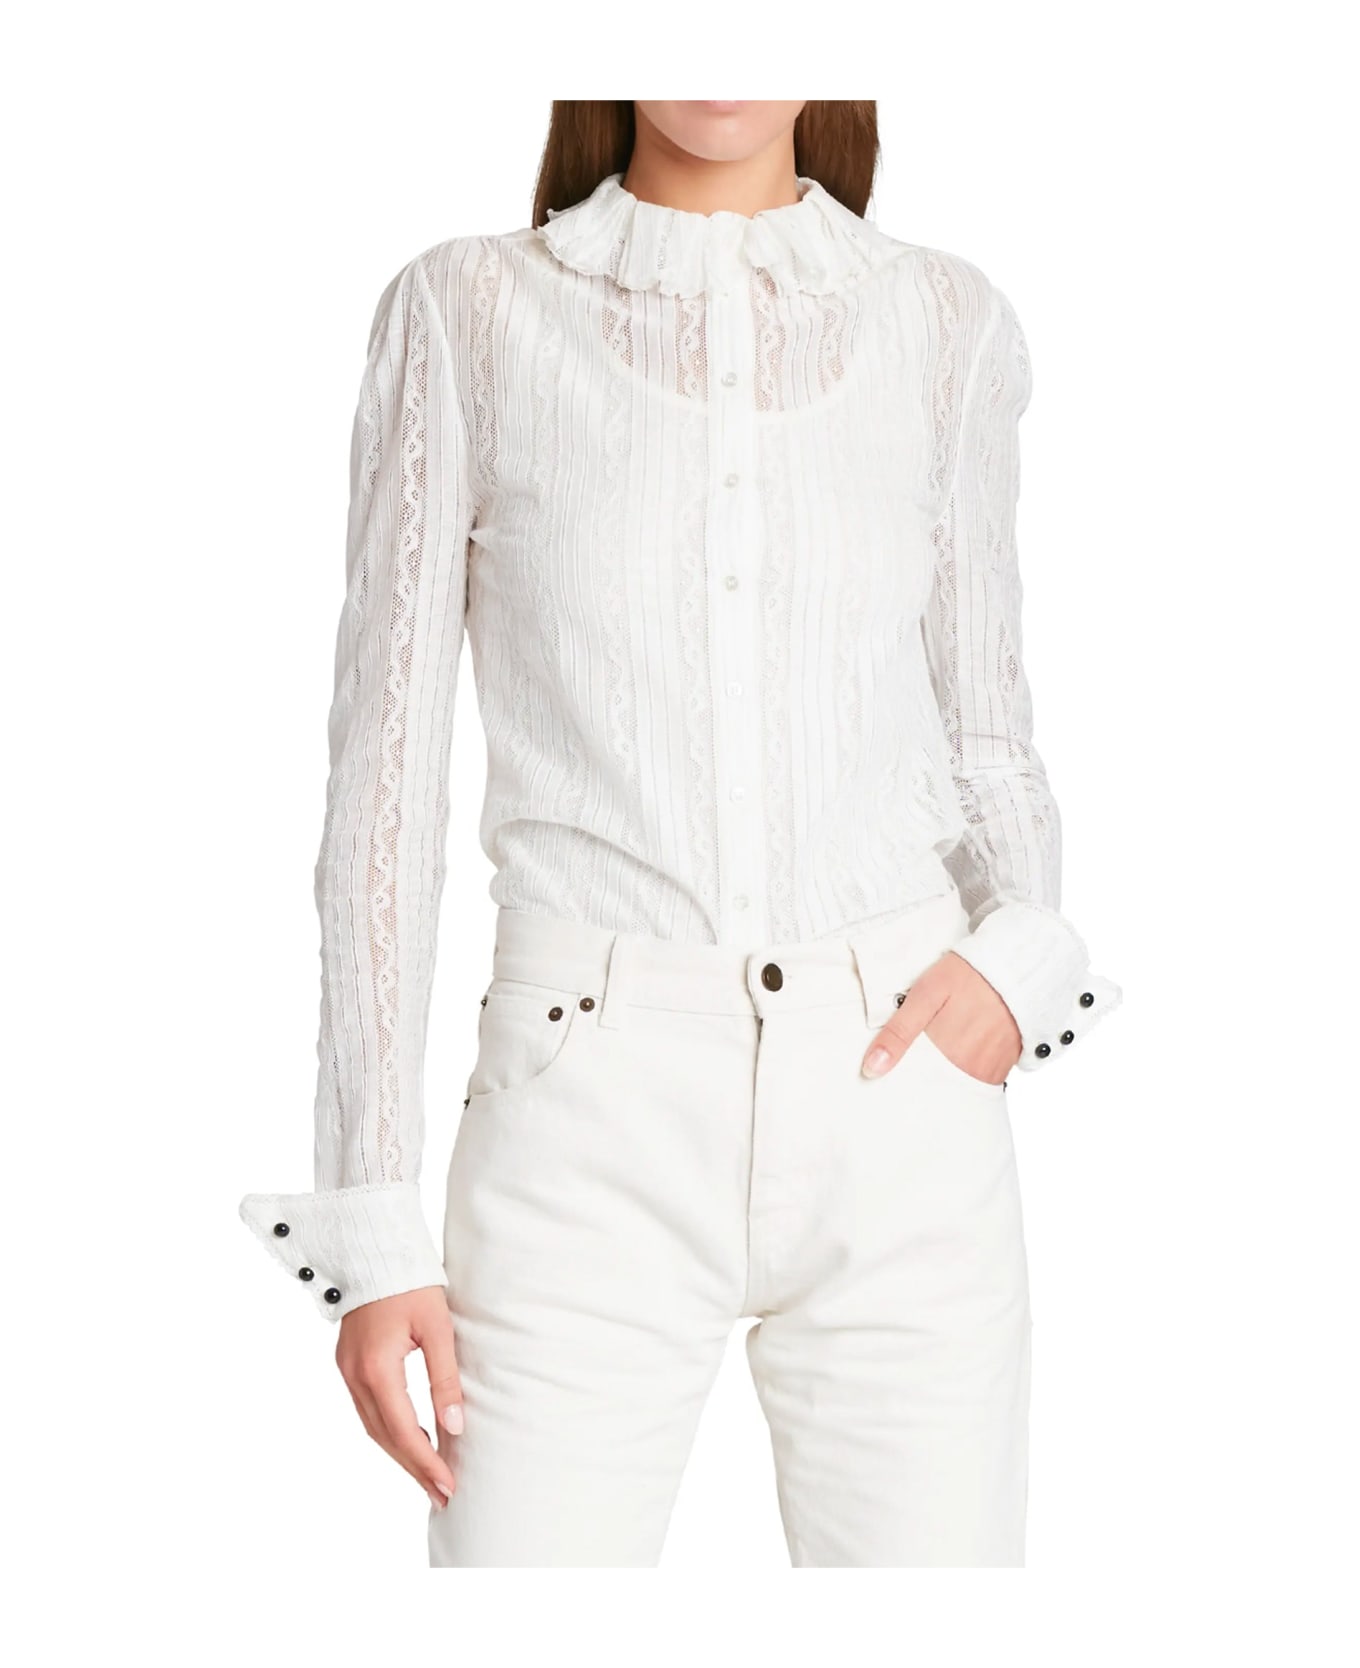 Saint Laurent Embroidered Blouse - White